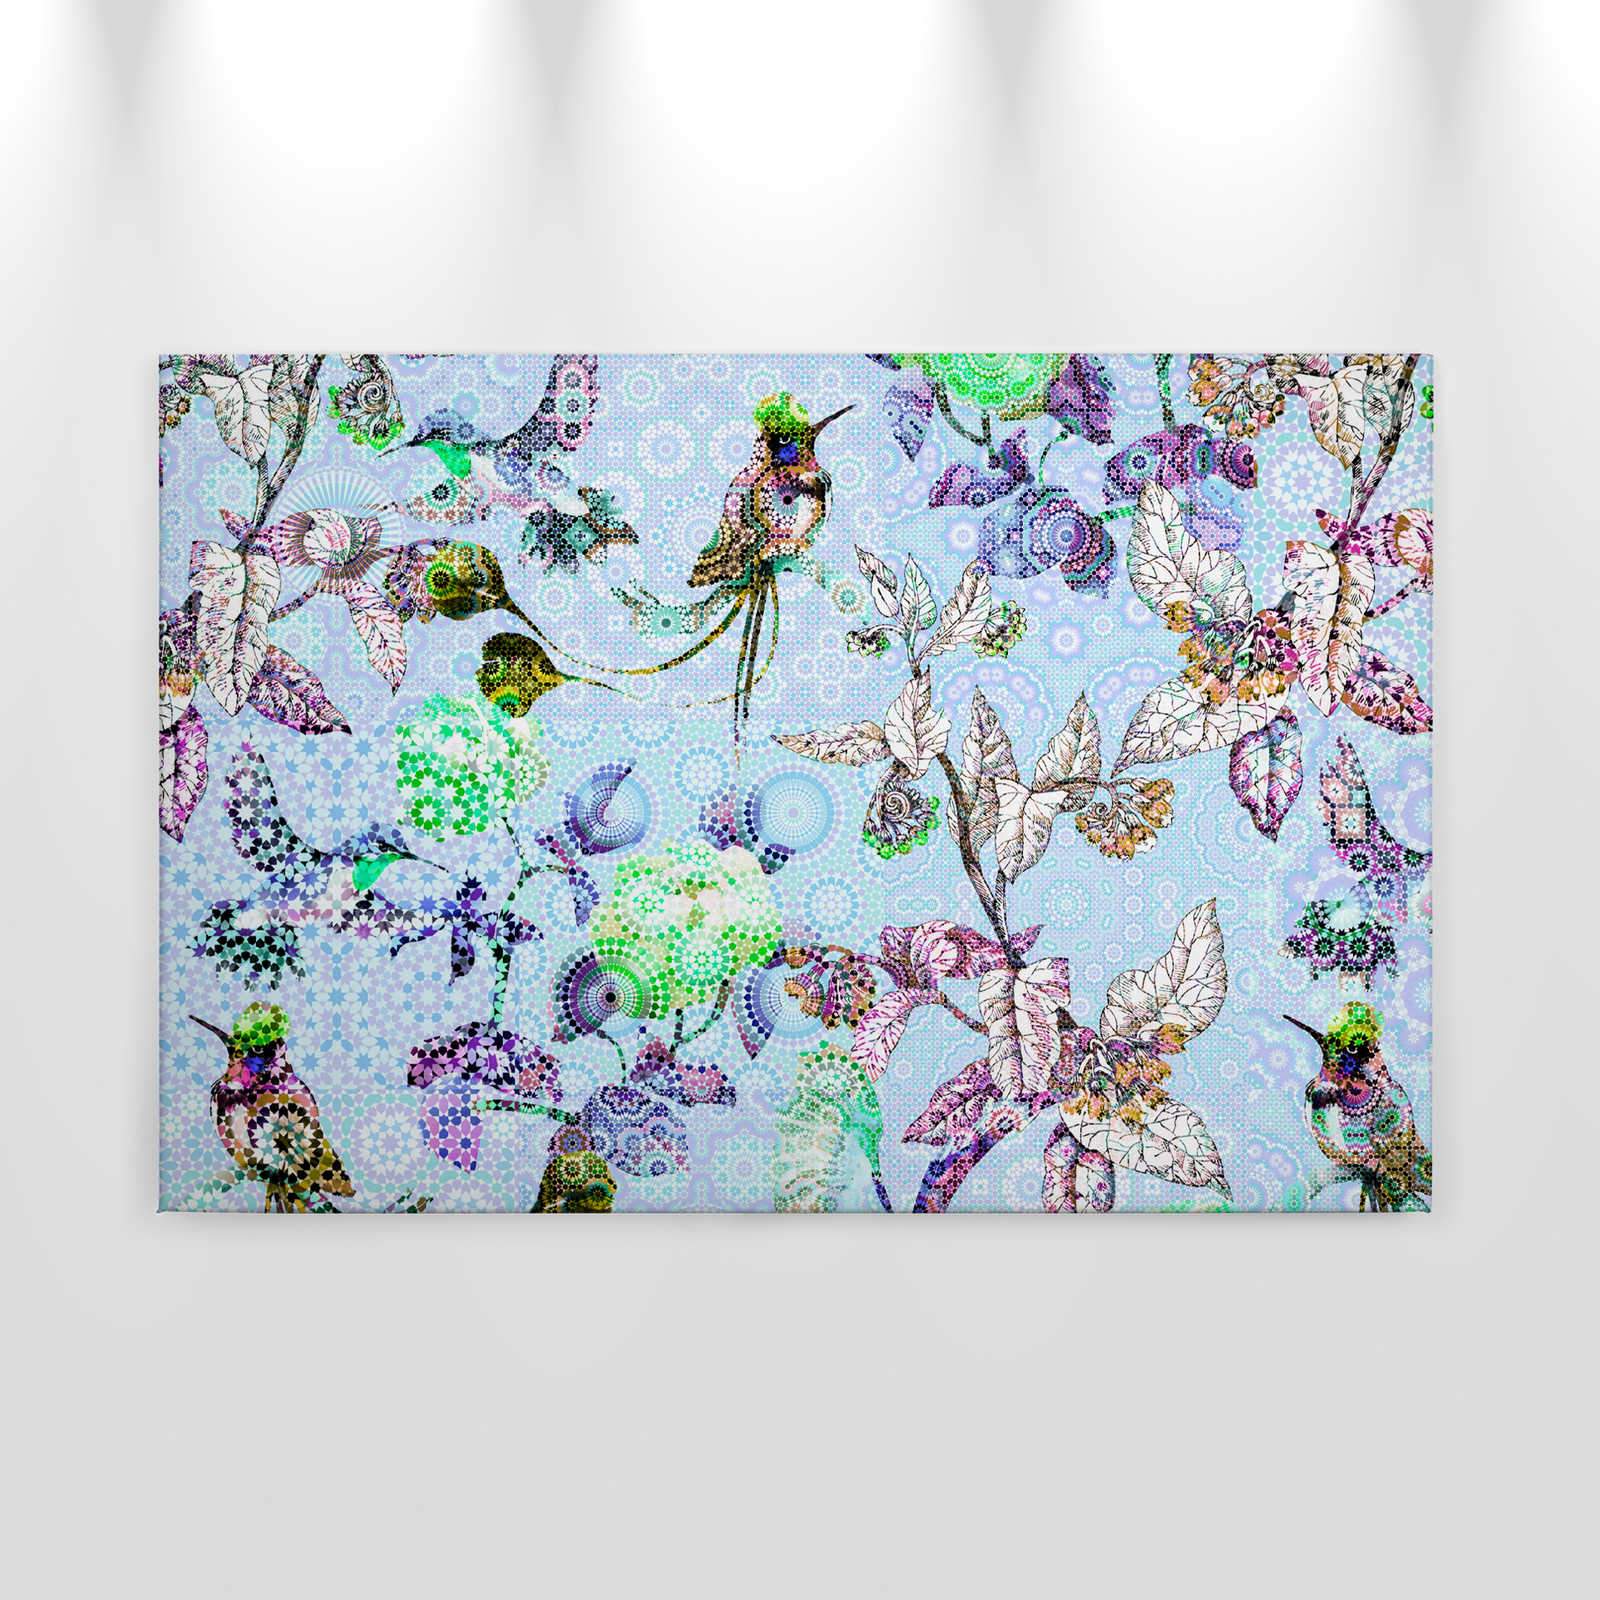             Canvas painting Flowers & Birds in Mosaic Style - 0,90 m x 0,60 m
        